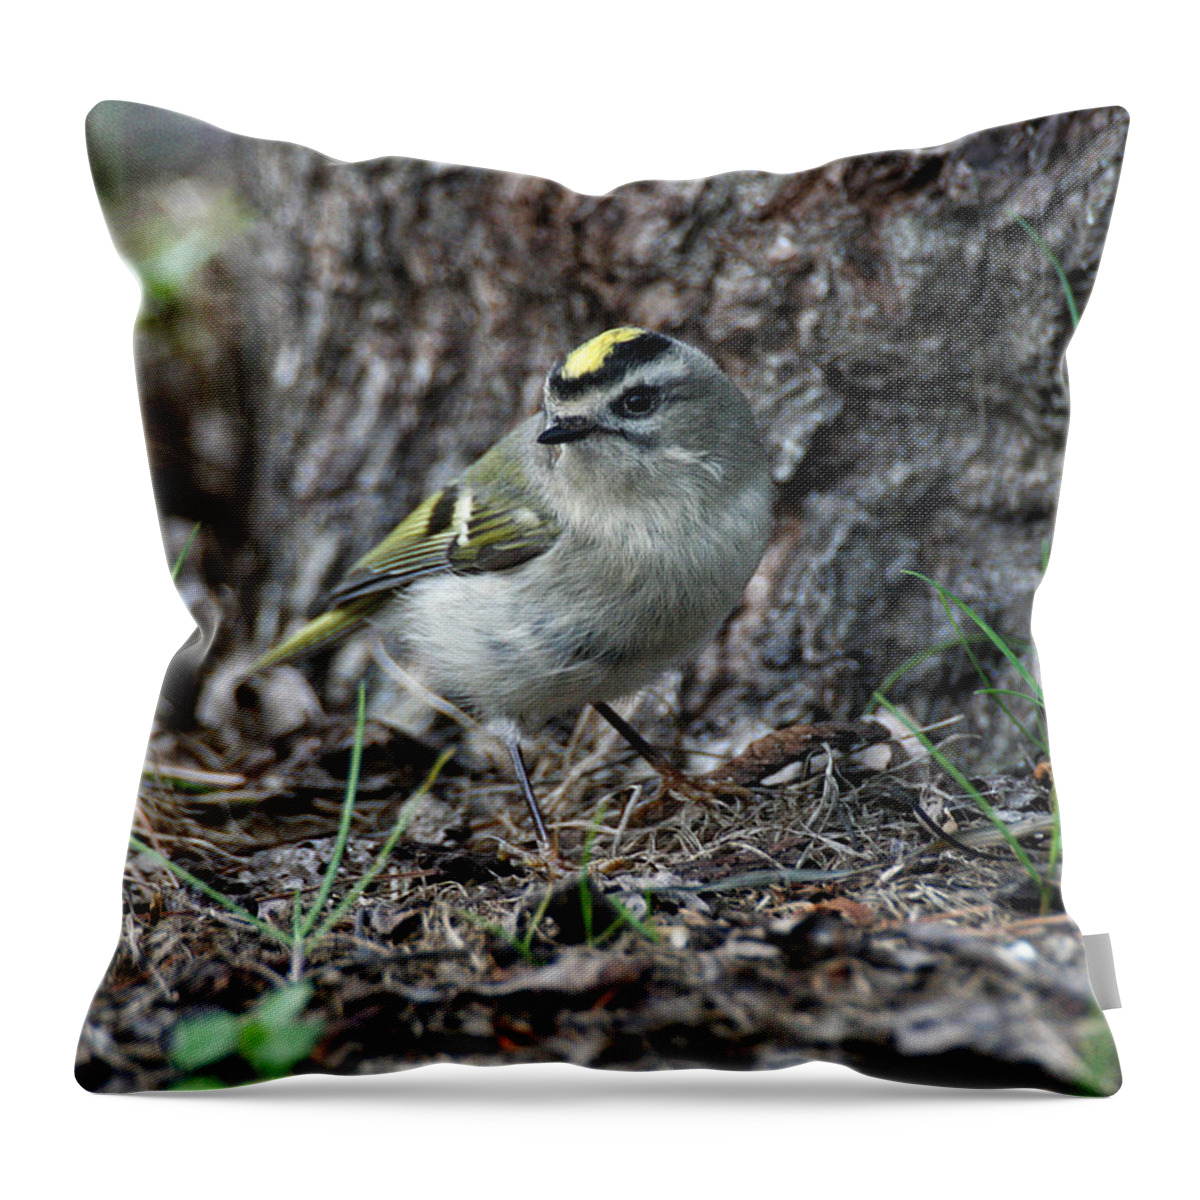 Wildlife Throw Pillow featuring the photograph Golden-crowned Kinglet by William Selander